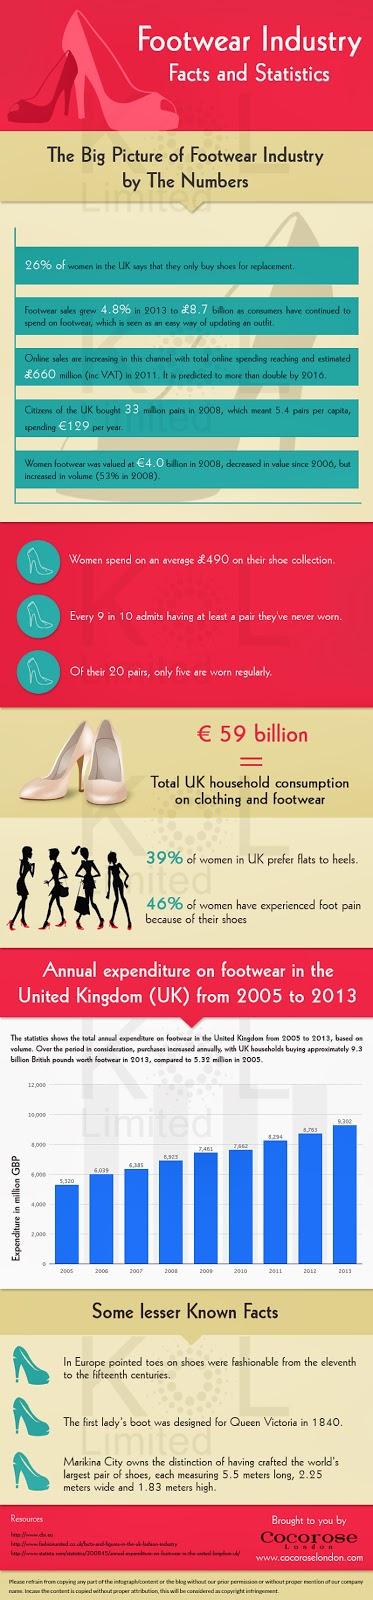 Footwear Industry Facts and Statistics [Infographic]